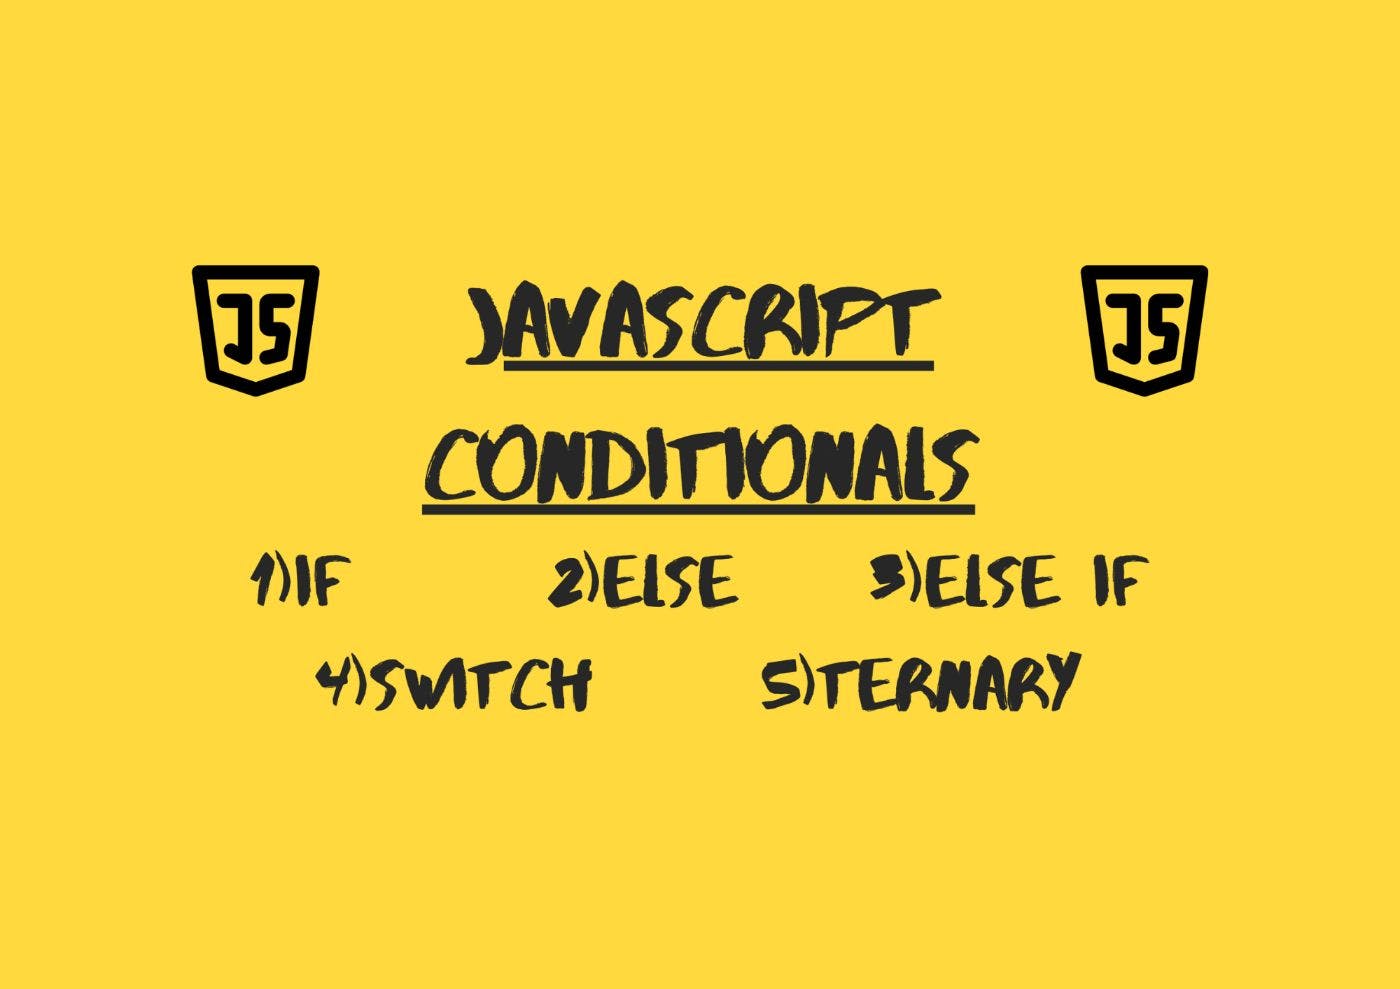 featured image - Mastering JavaScript Conditionals 